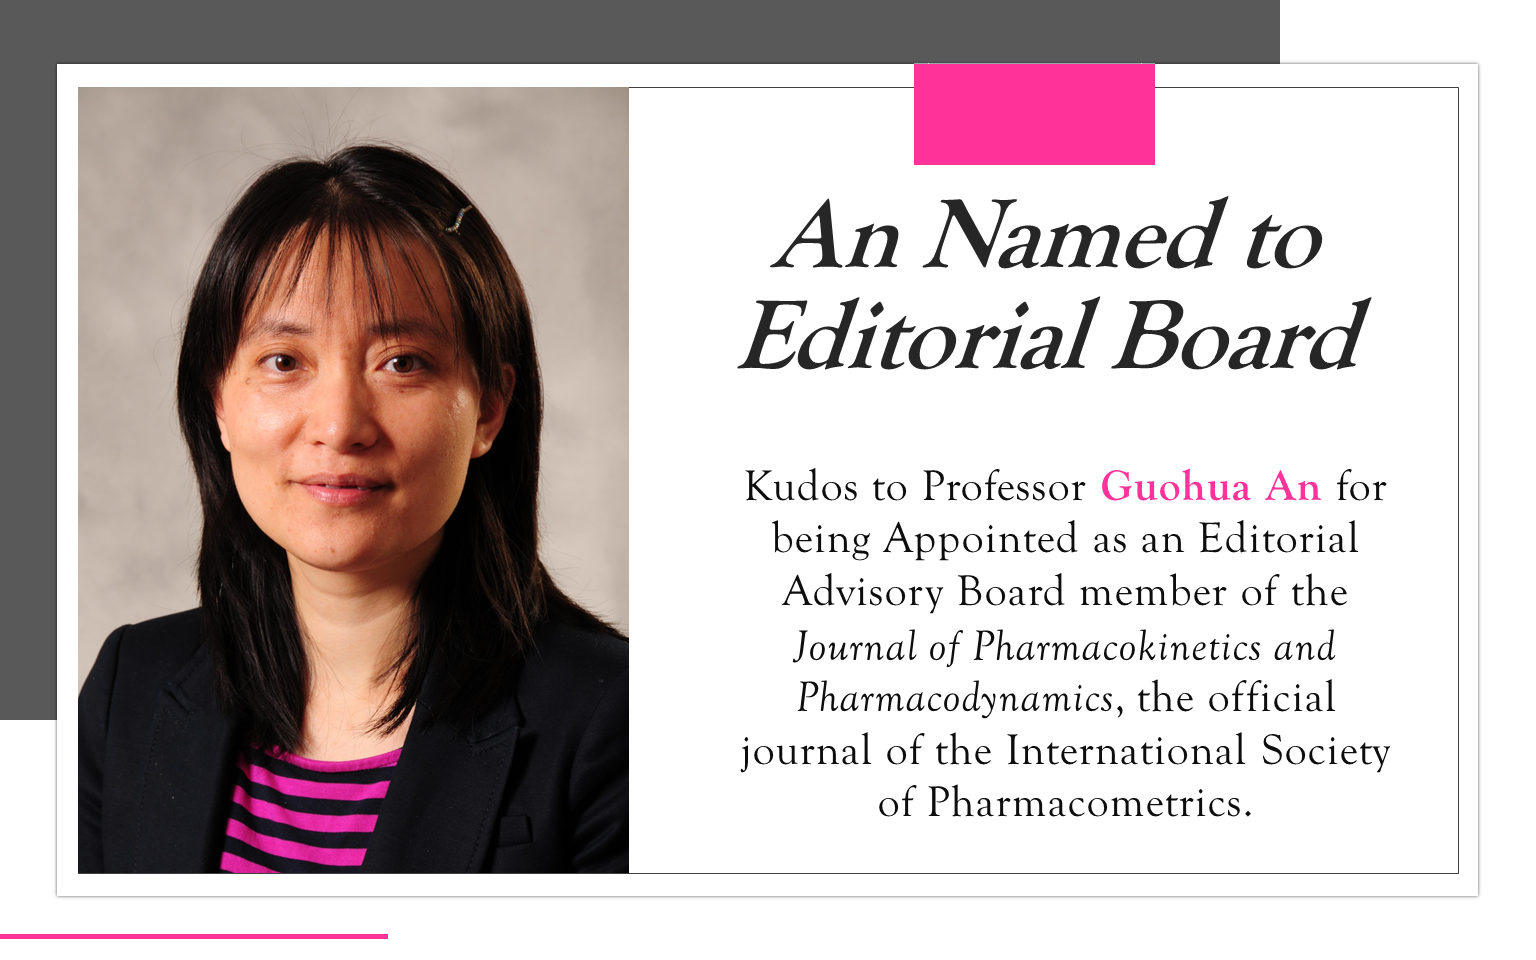 An Appointed to Editorial Board